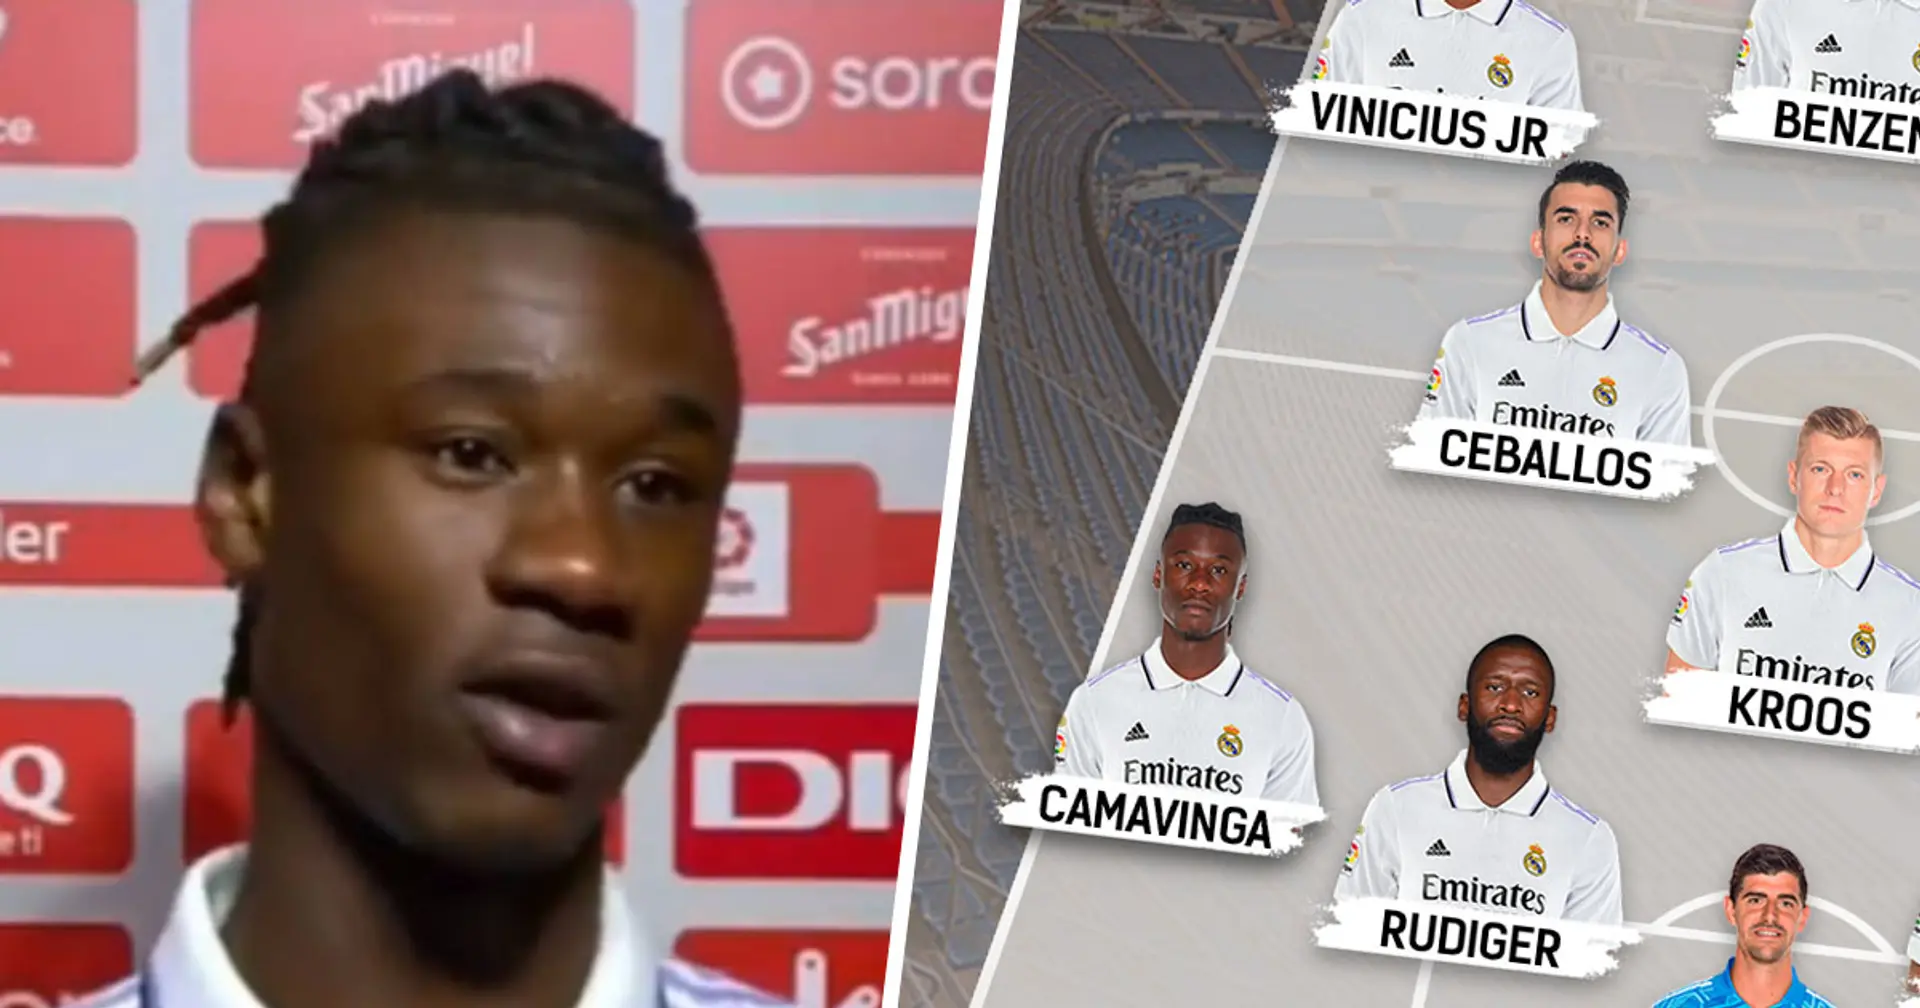 'I played 30 minutes there in the academy': Camavinga reacts to new left-back position